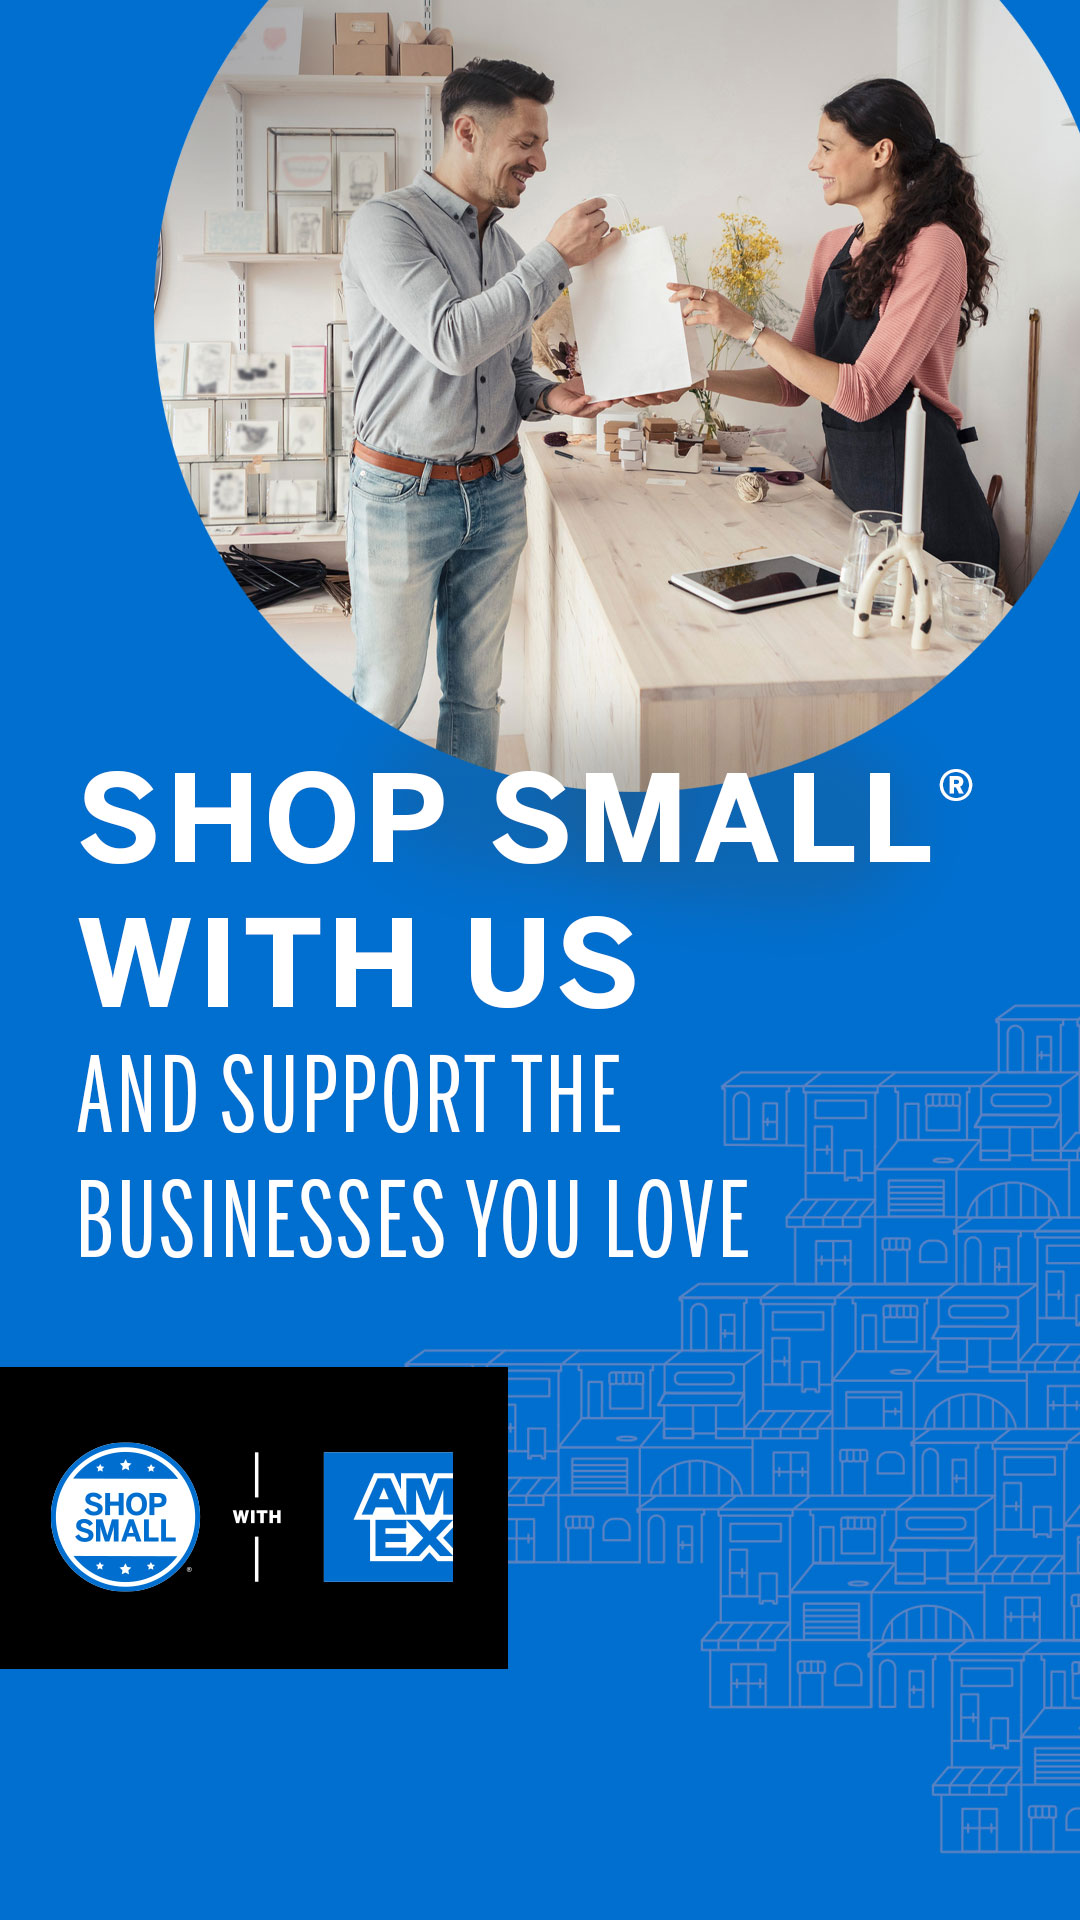 Graphic with an image of customer at checkout being handed a bag by small business owner. Message overlaid says shop small with us and support the businesses you love and includes the shop small with amex logo